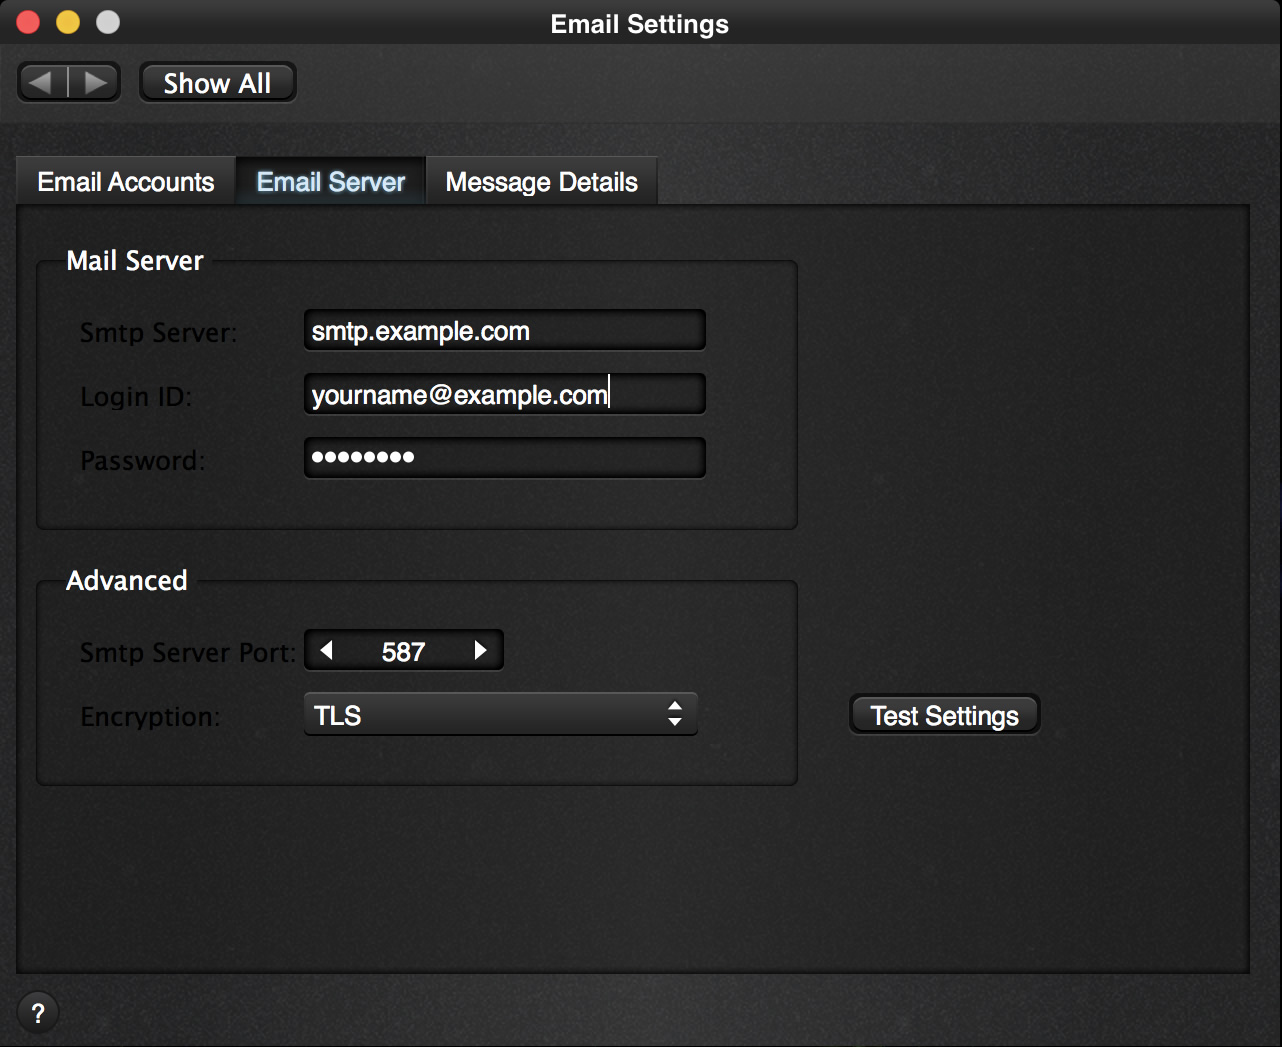 Email Settings - Email Server configuration